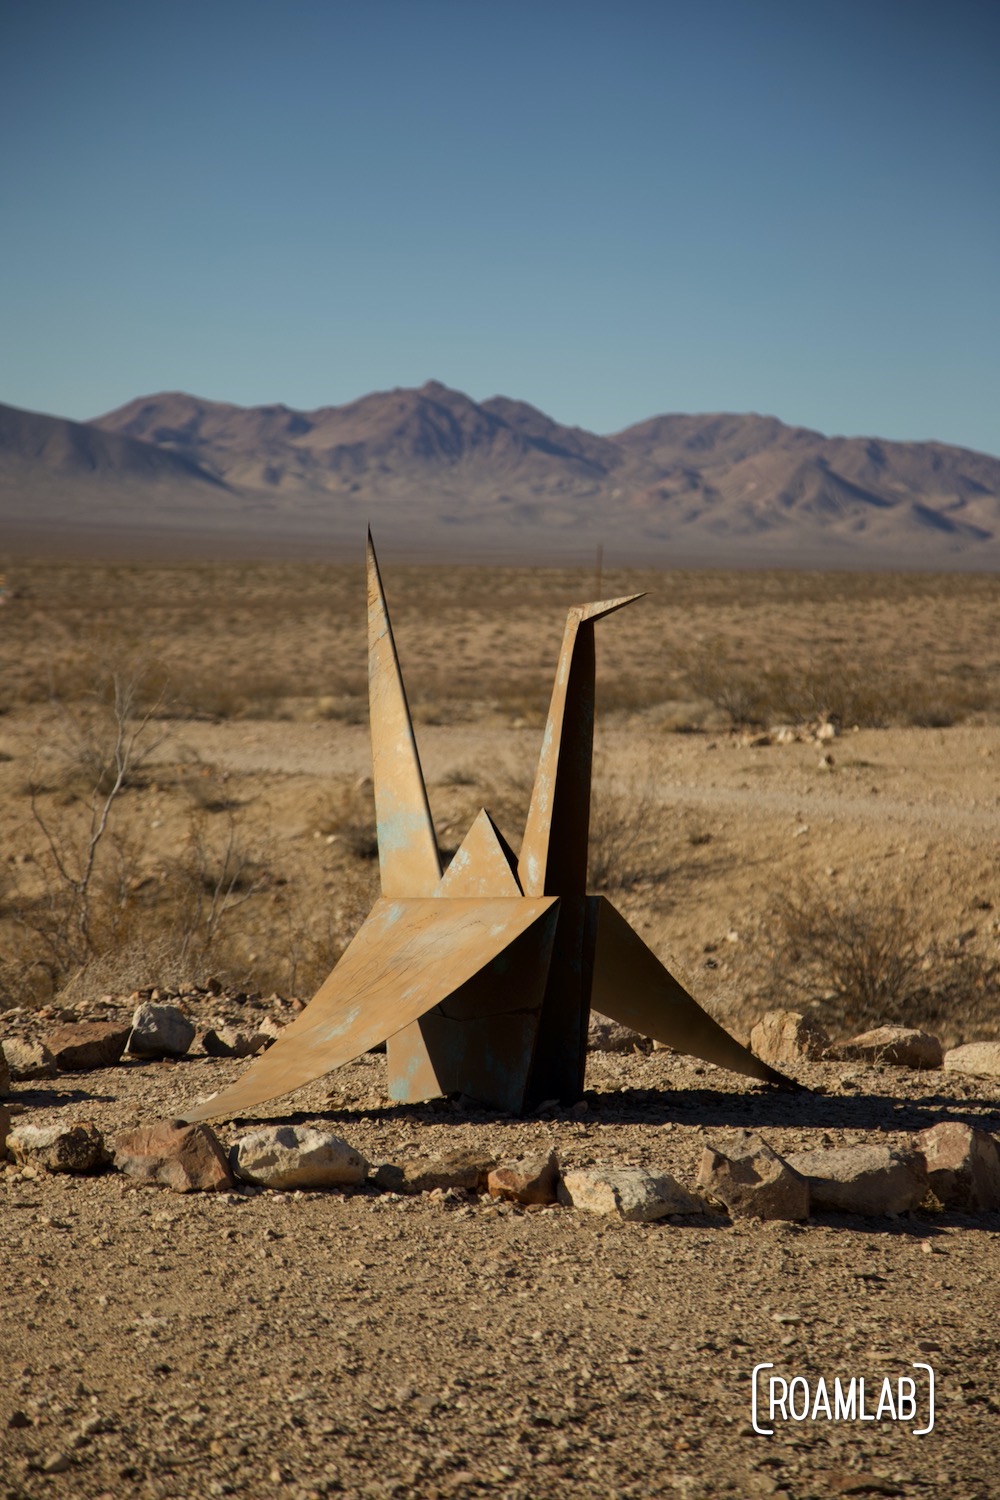 Giant origami crane composed of folded sheet metal located in the Nevada desert.